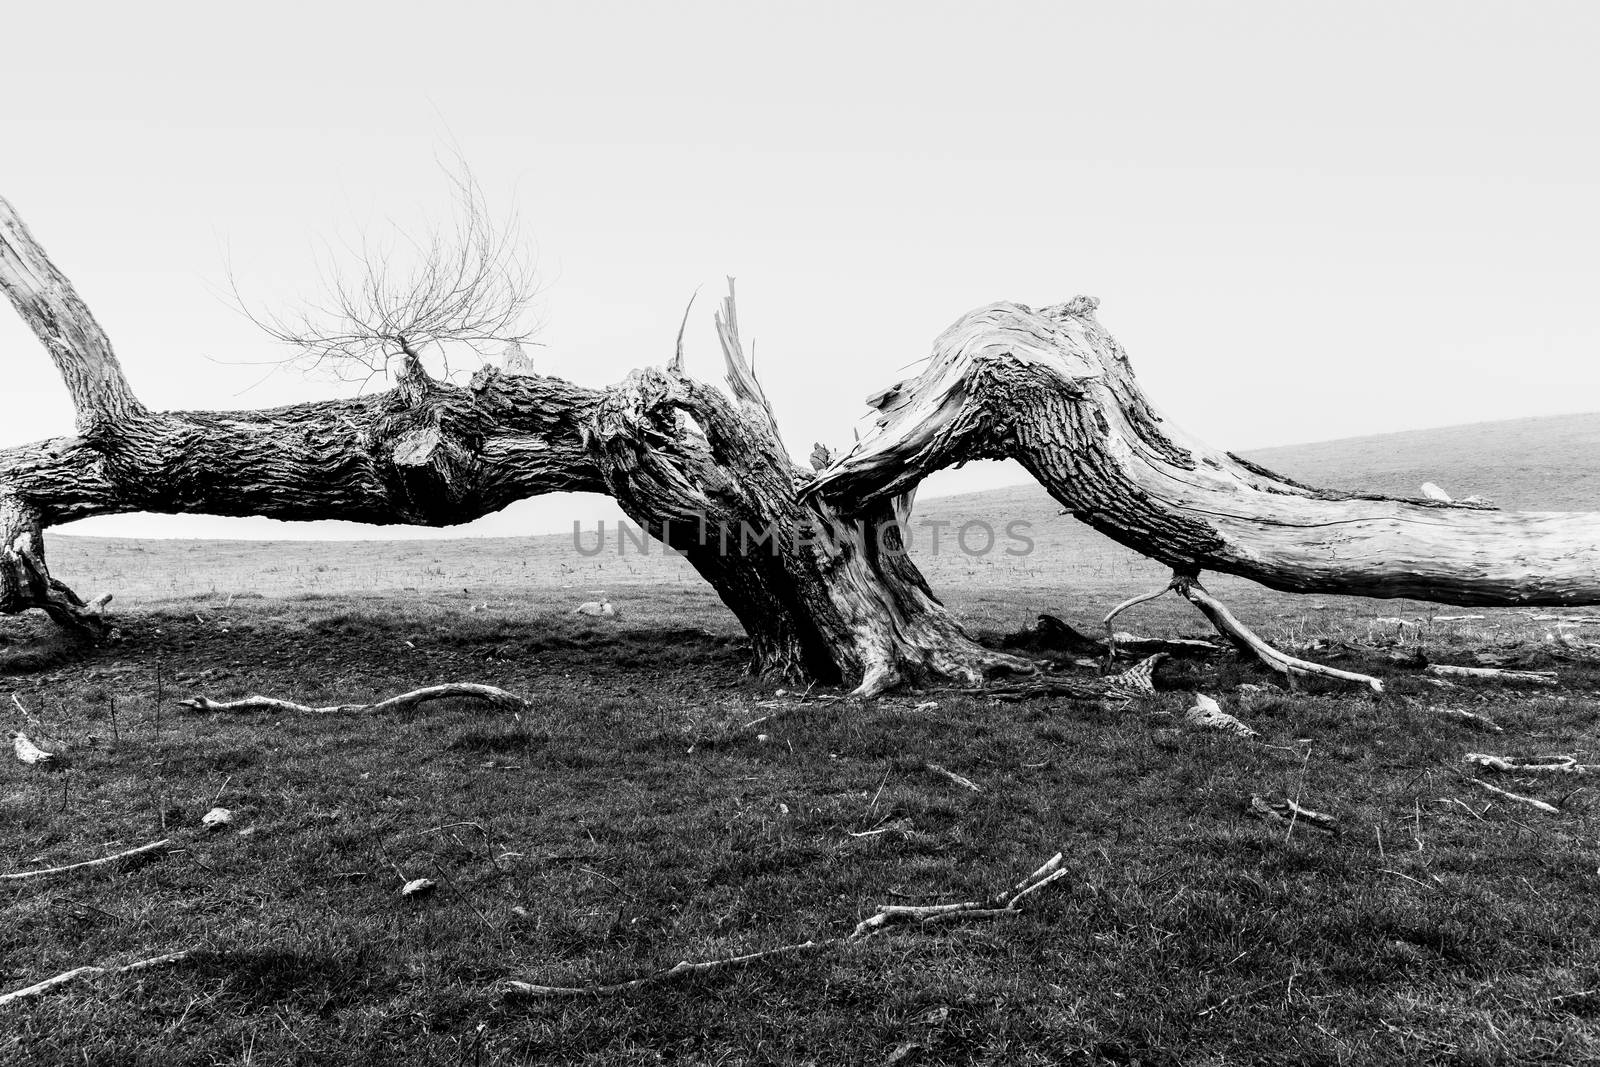 Old tree dead and split lying across ground rustic nature image.